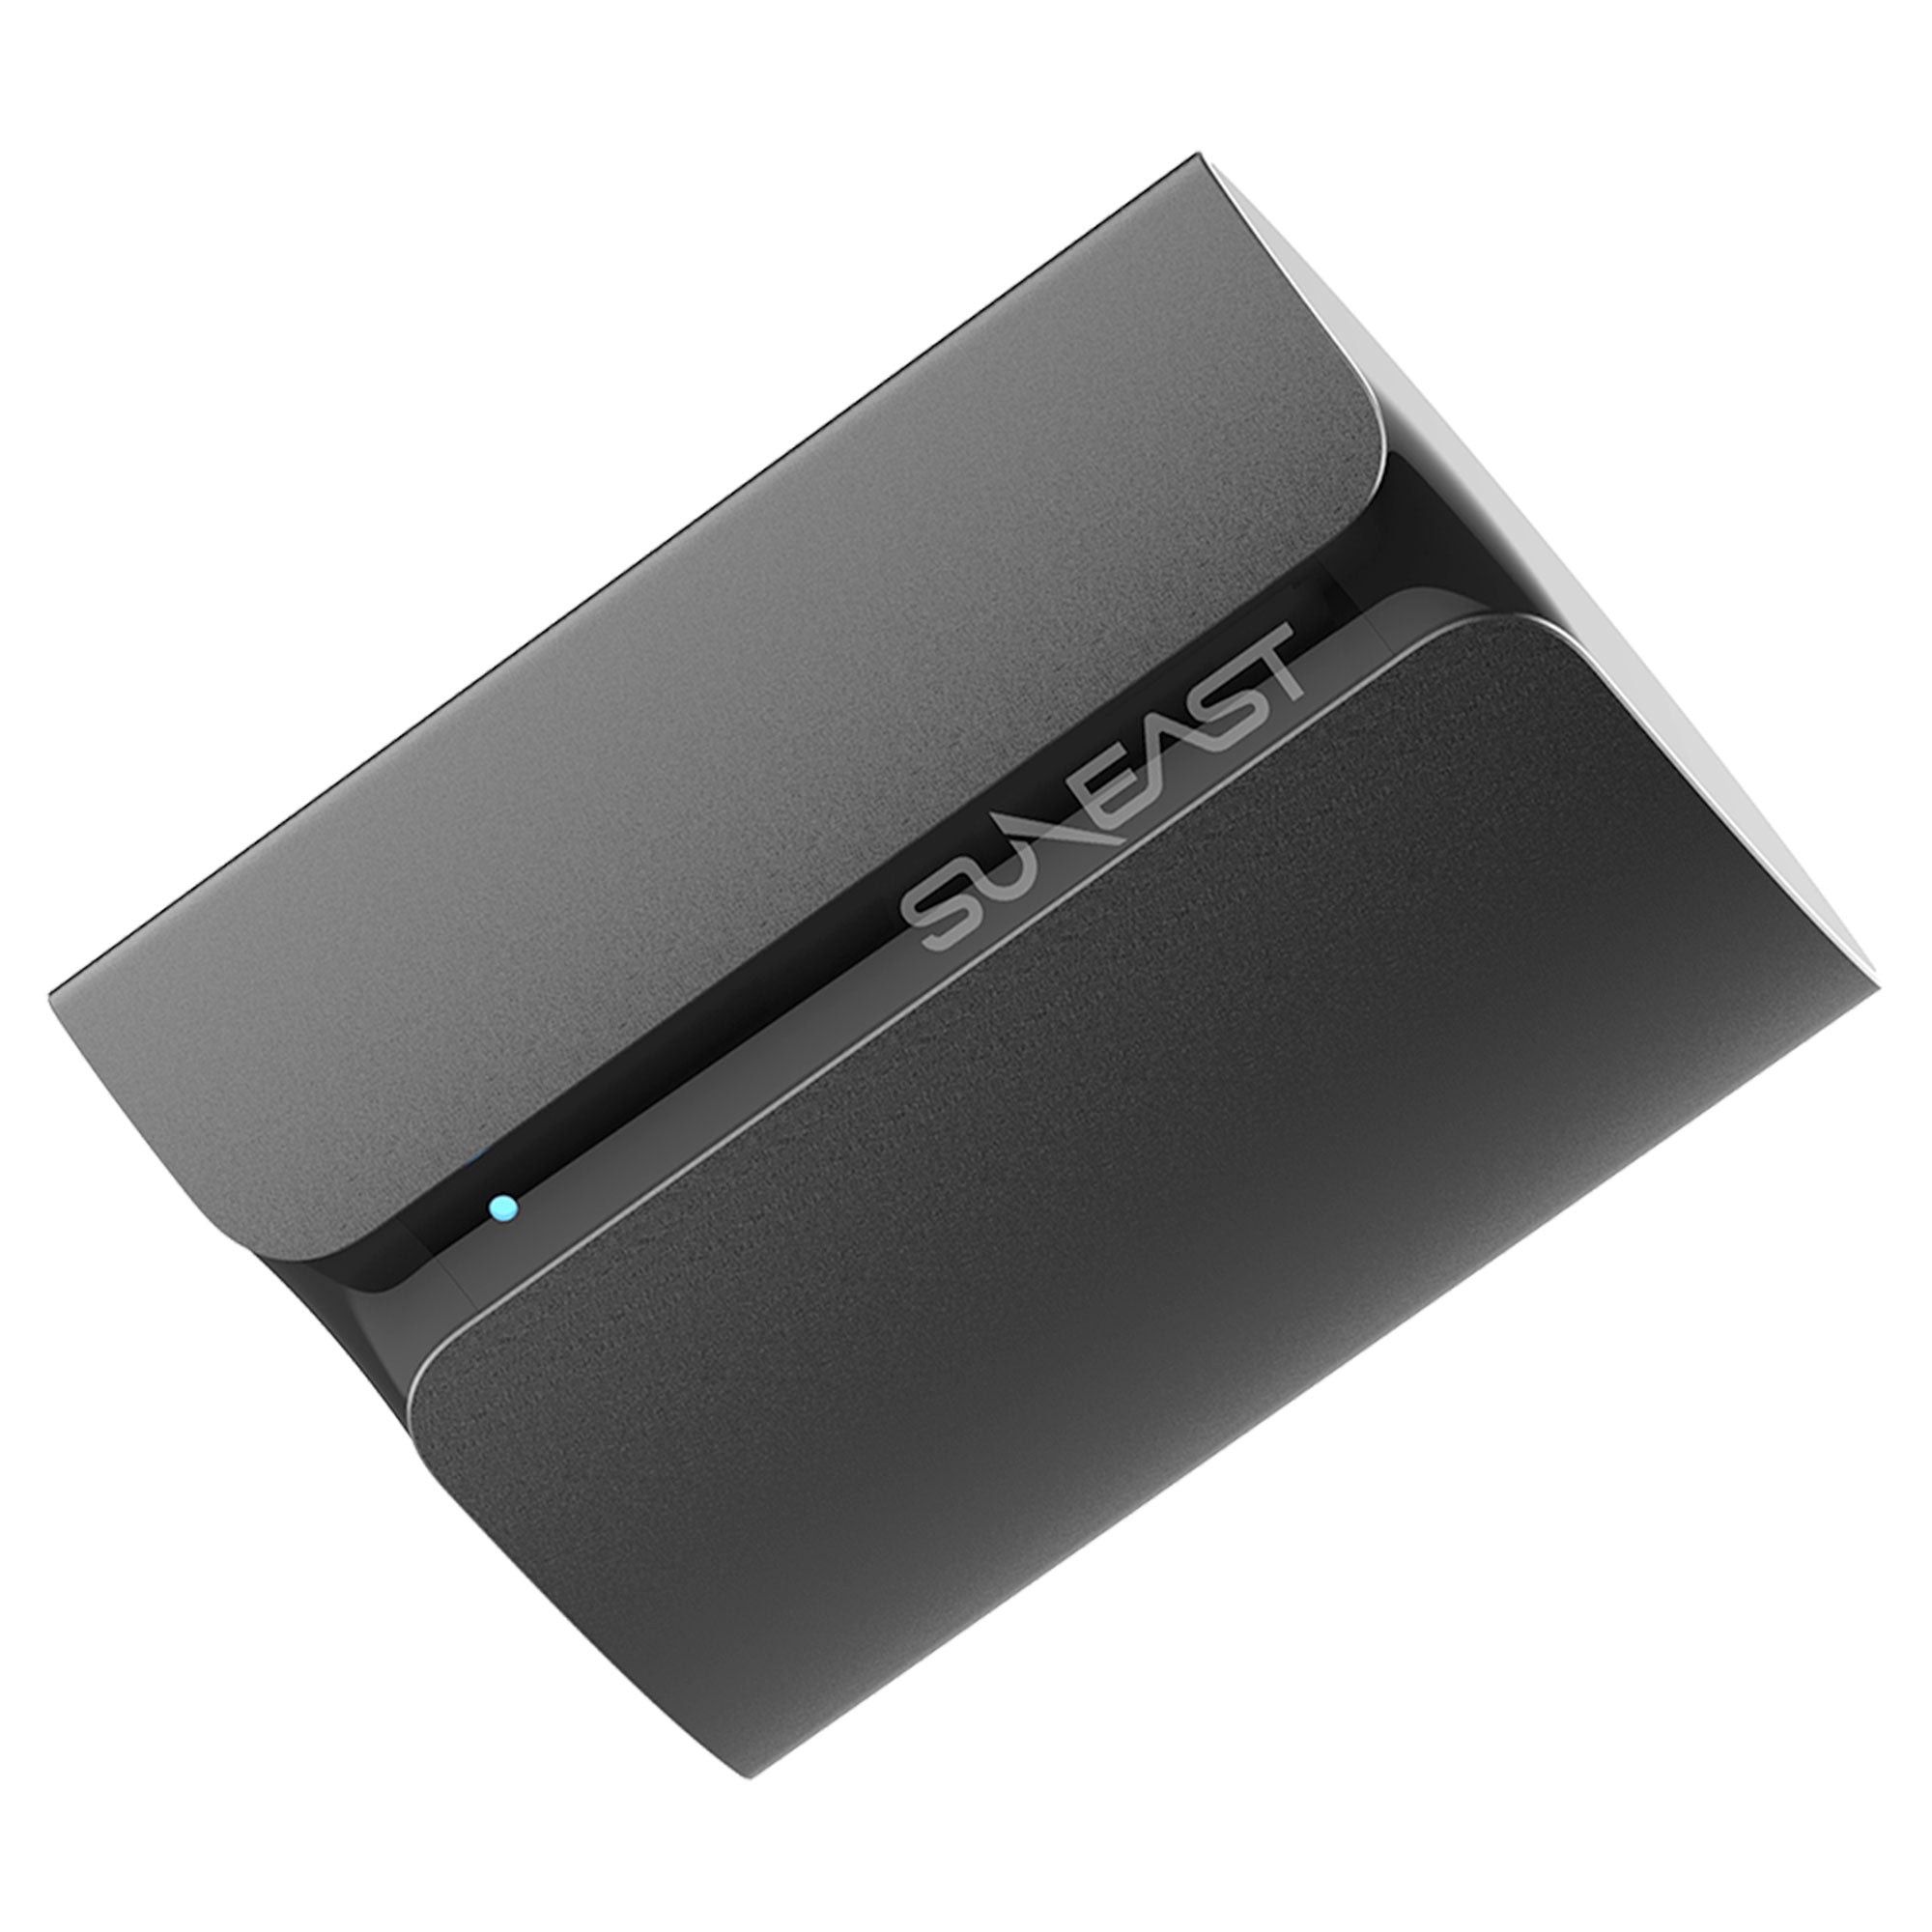 Portable SSD 512GB USB 3.1 Type-C - SUNEAST online store